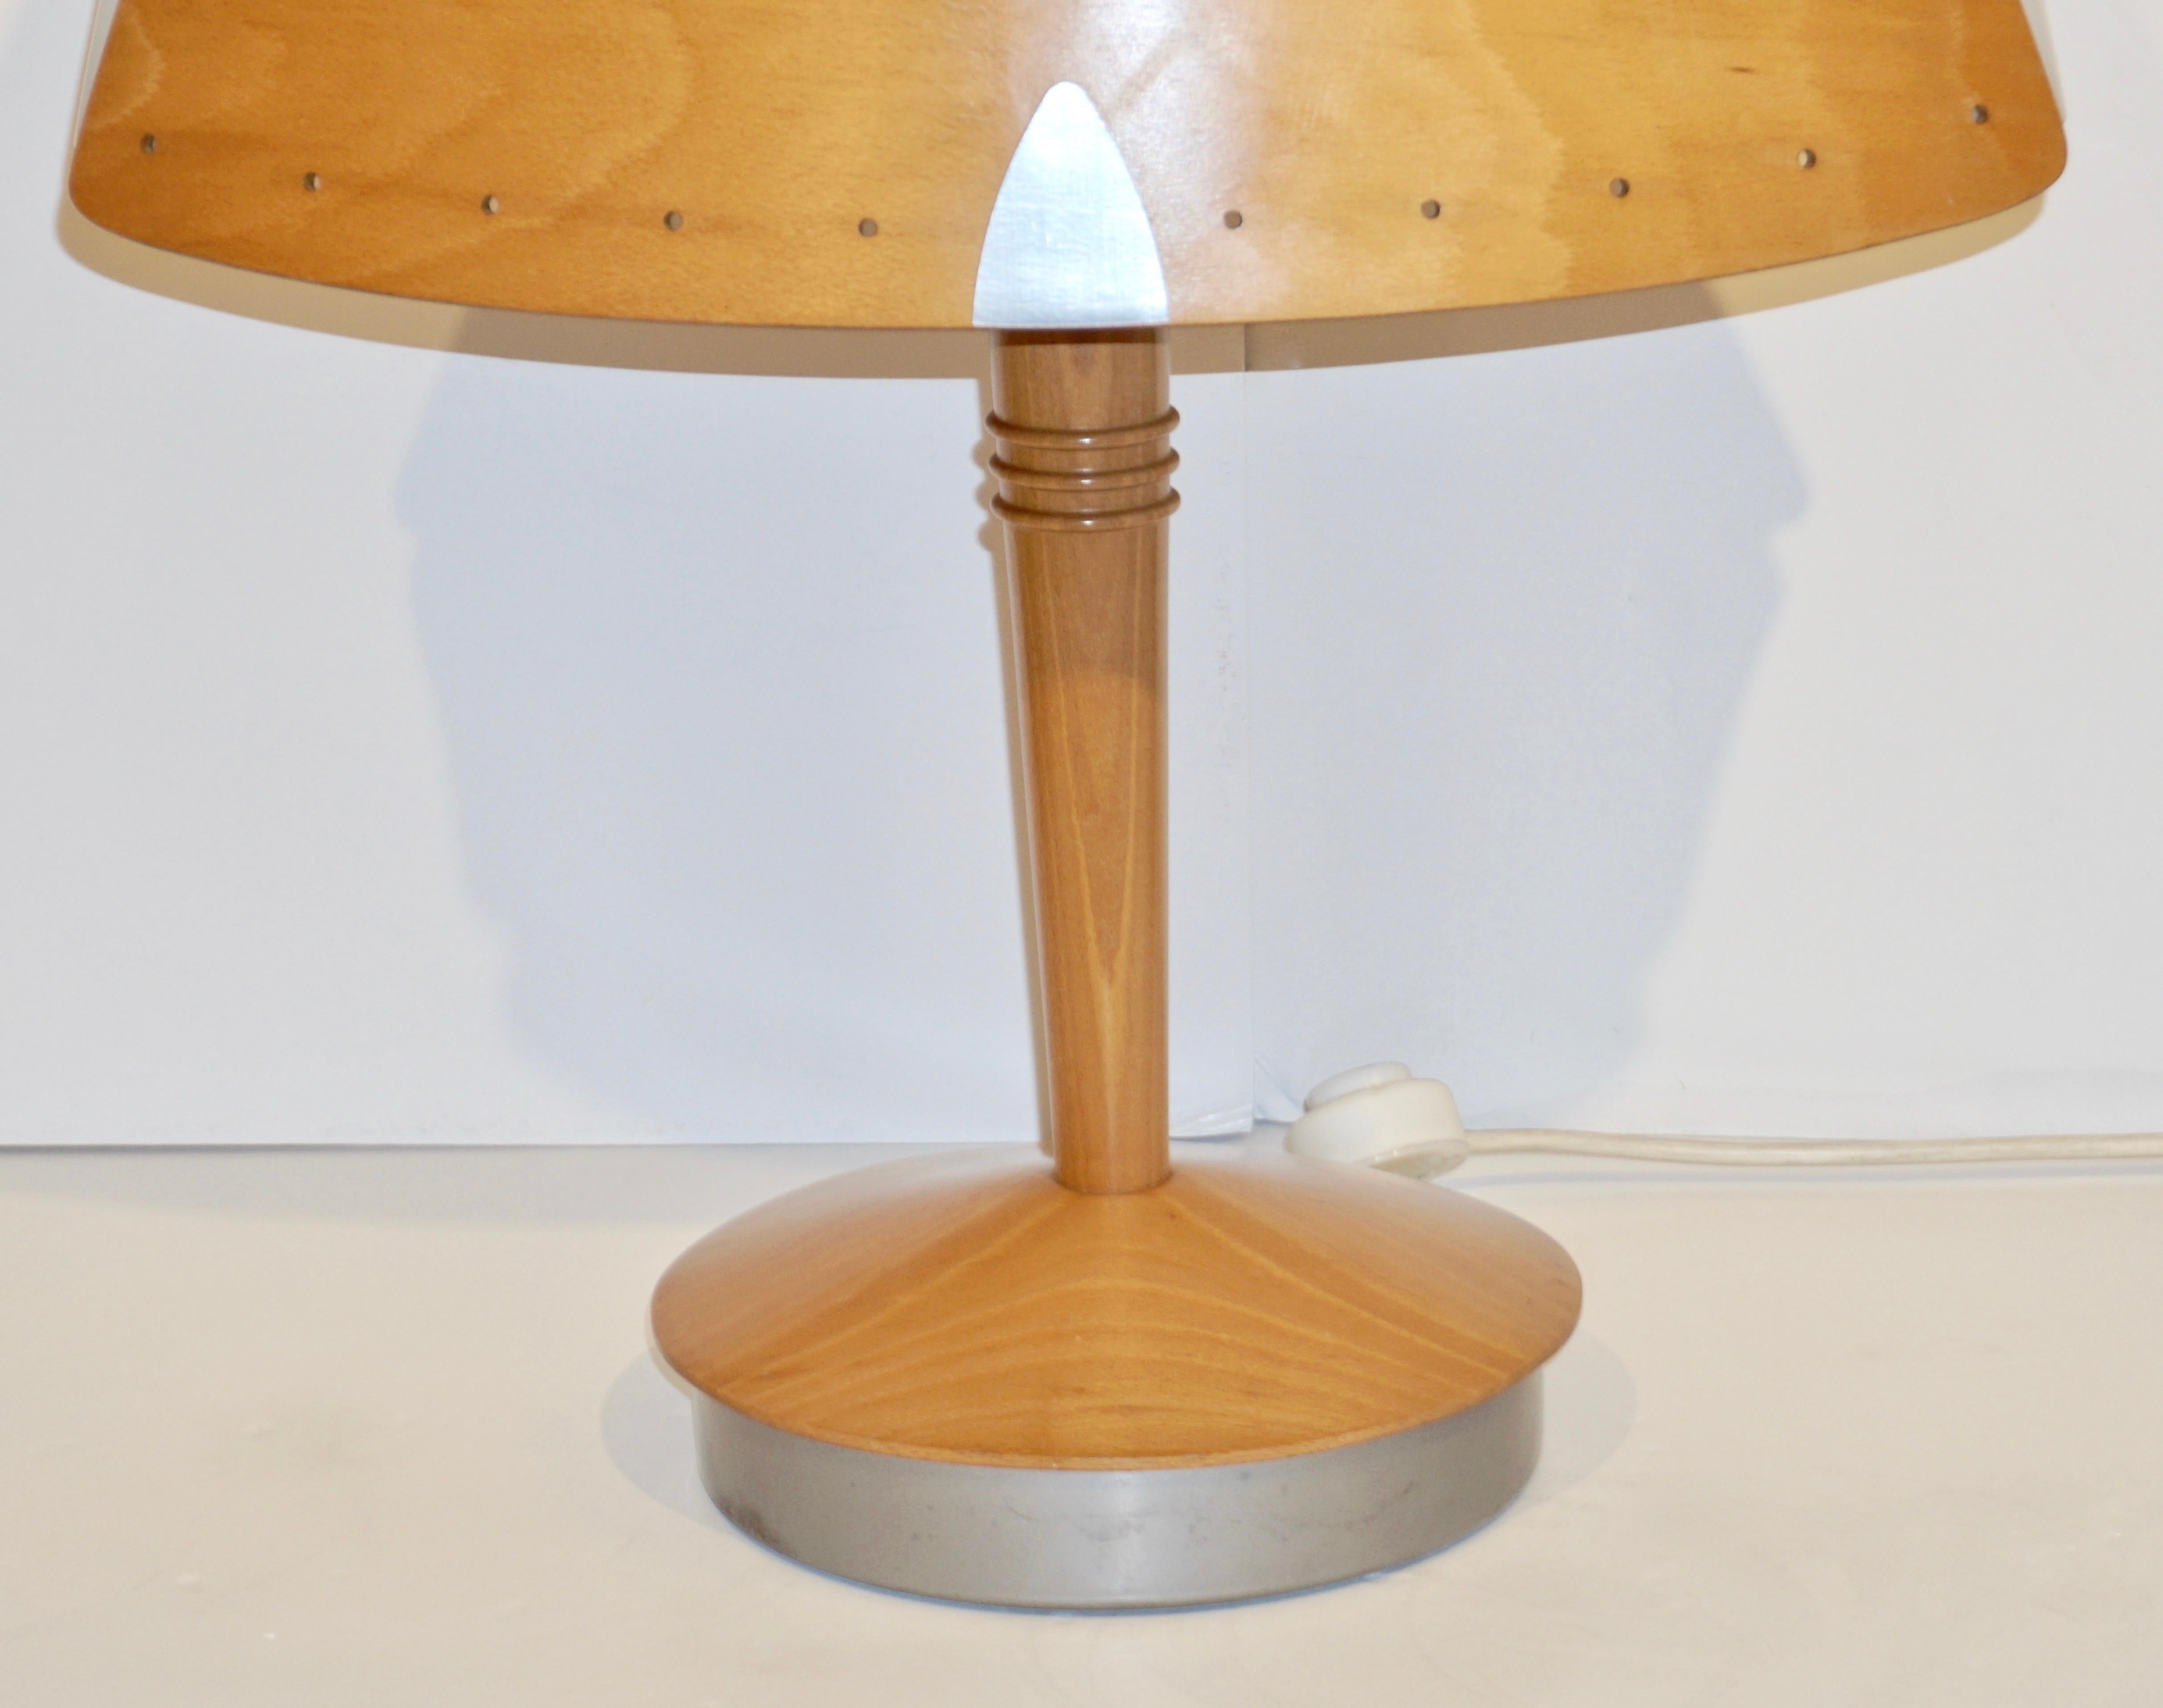 1970 French Pair of Birch Wood and Acrylic Table Lamp for Barcelona Hilton Hotel For Sale 3